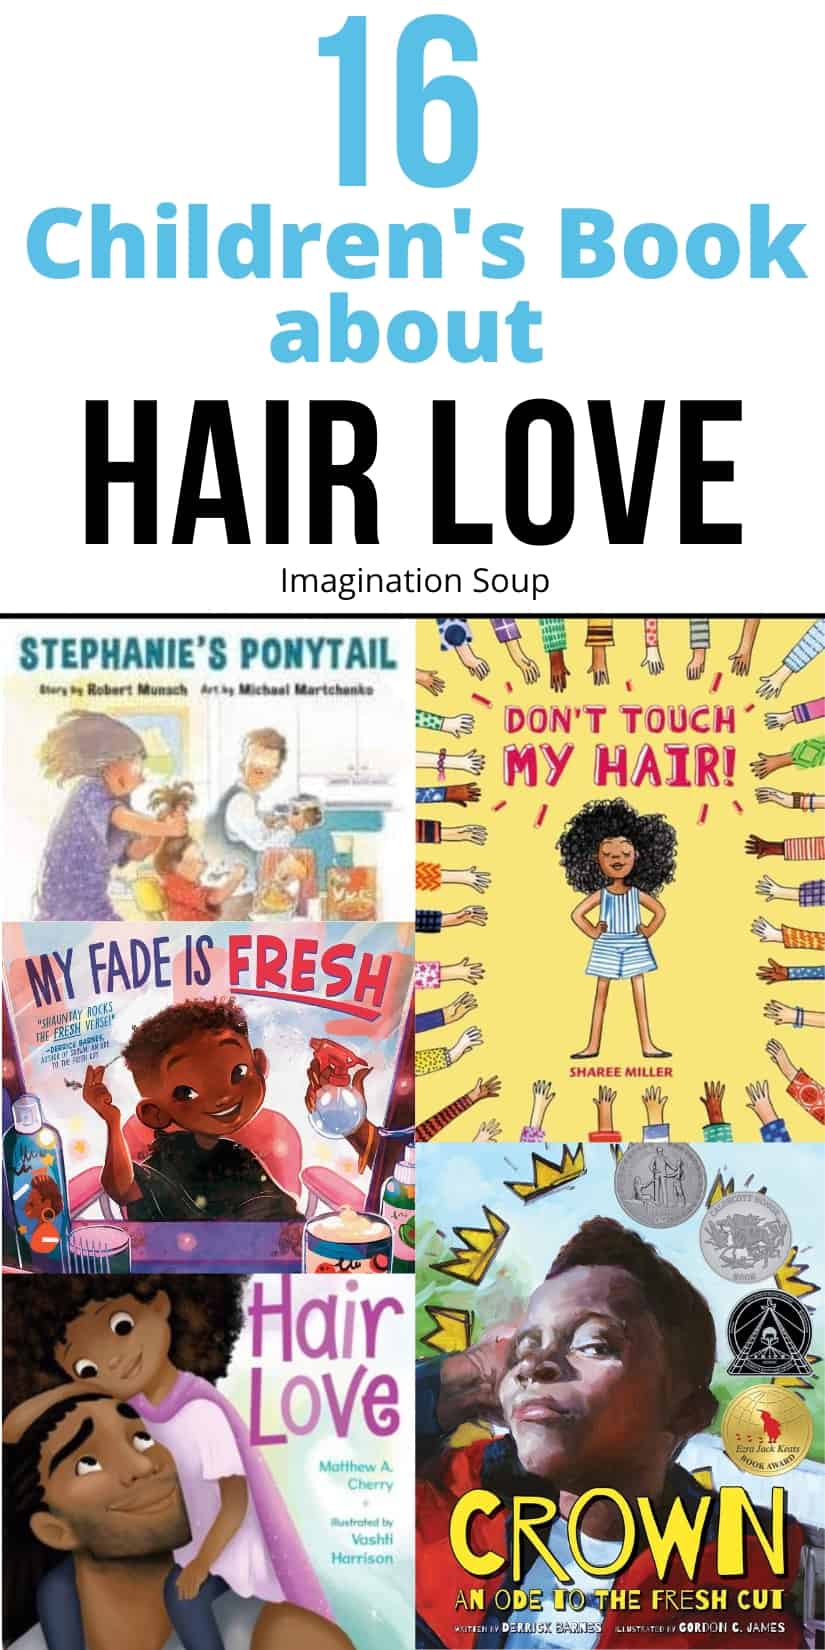 Some kids grow up not liking their hair, right? These books might help change that -- particularly for African-American kids. It's both representation and affirmation and hair love!

You'll also read a cautionary tale about NOT combing your hair, as well as a funny story about copying other people's hairstyles.